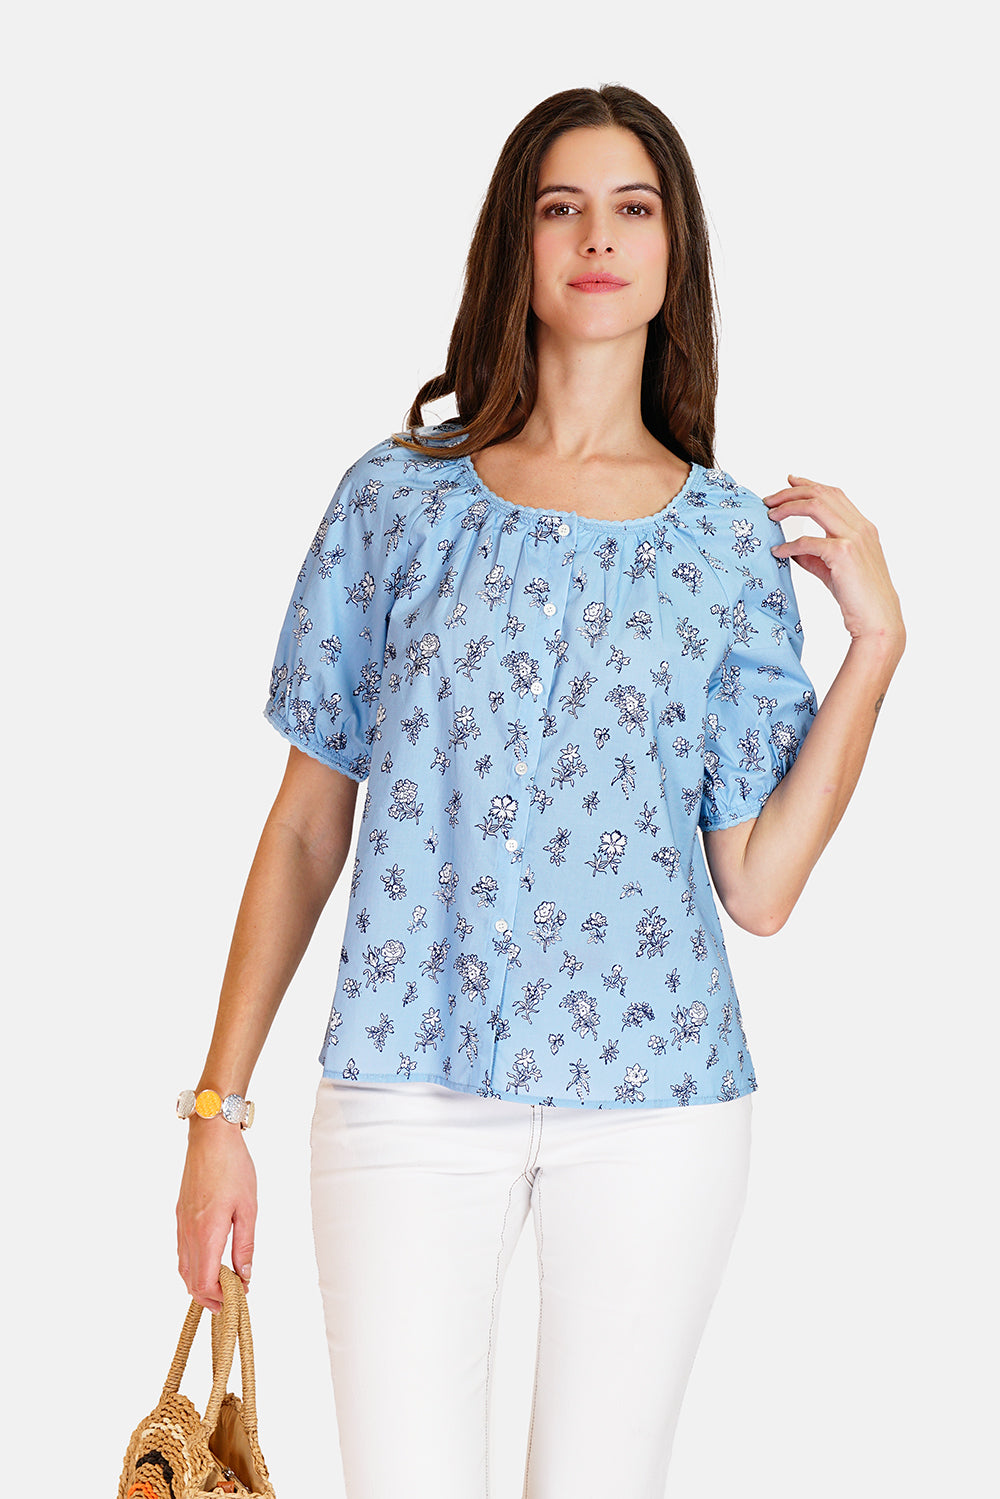 Blouse with embroidery at the edge of the collar, 3/4 sleeves in print